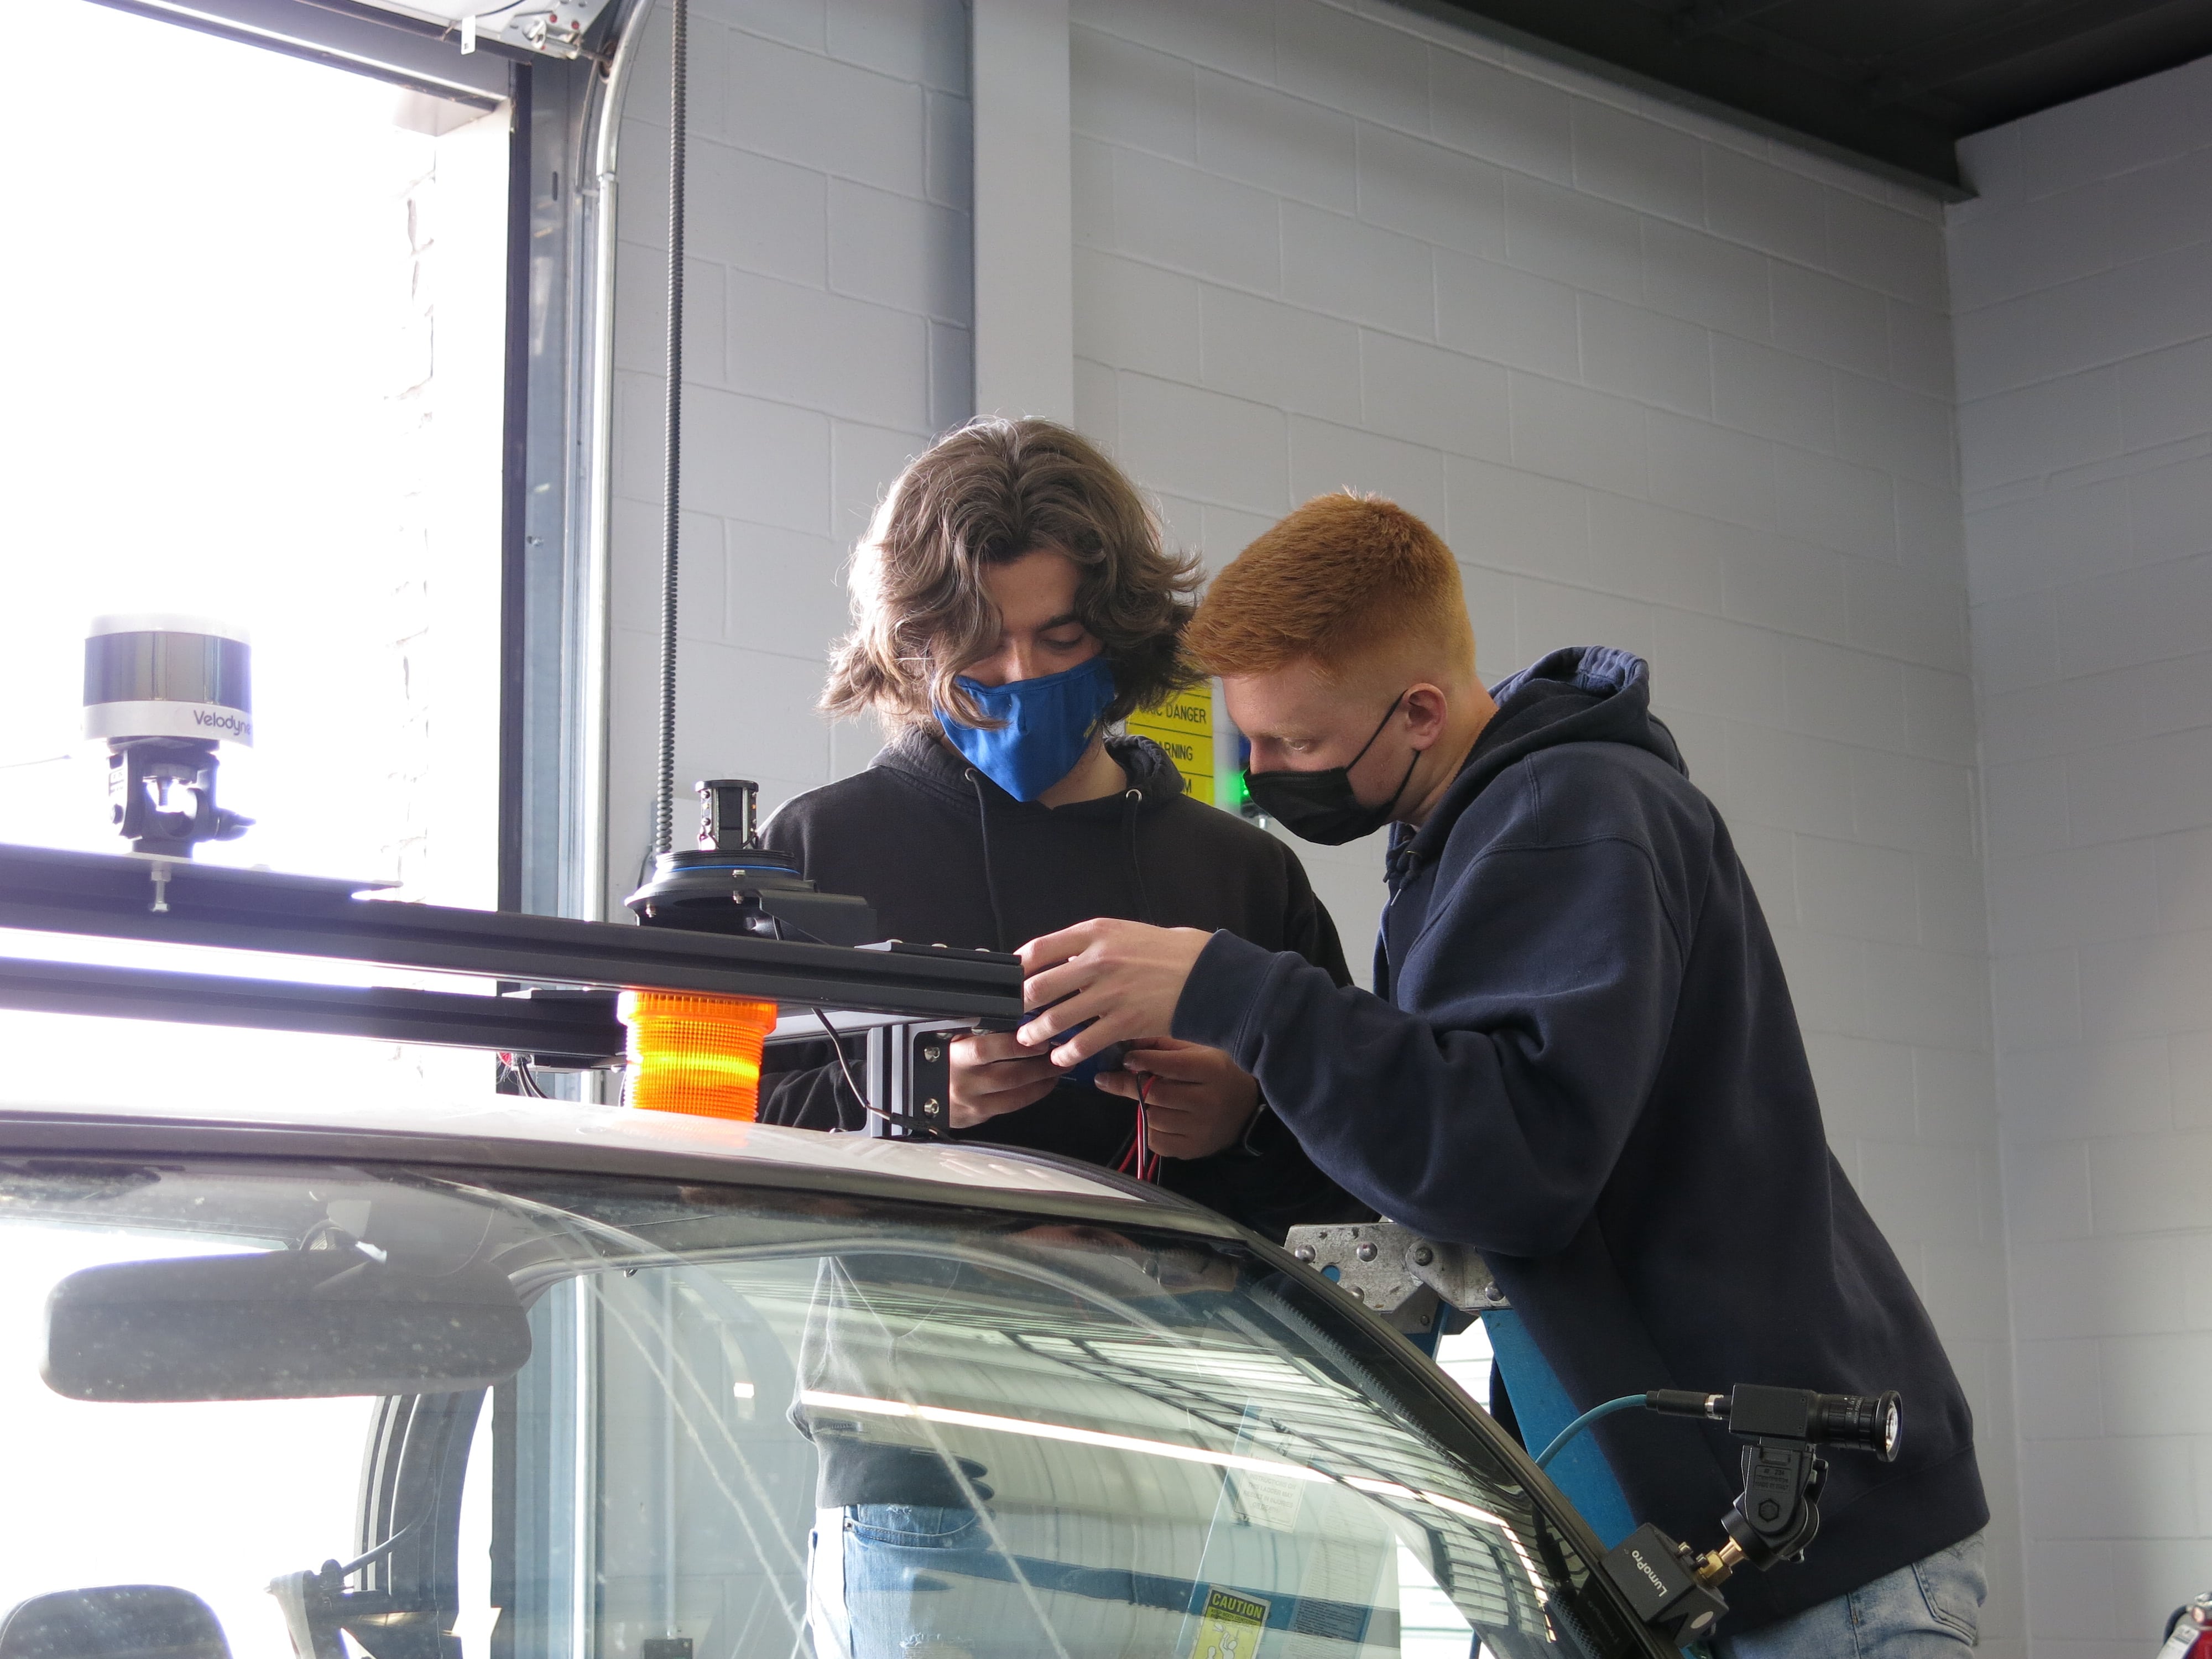 Two Kettering University students work on wiring on the roof of an intelligent ground vehicle.